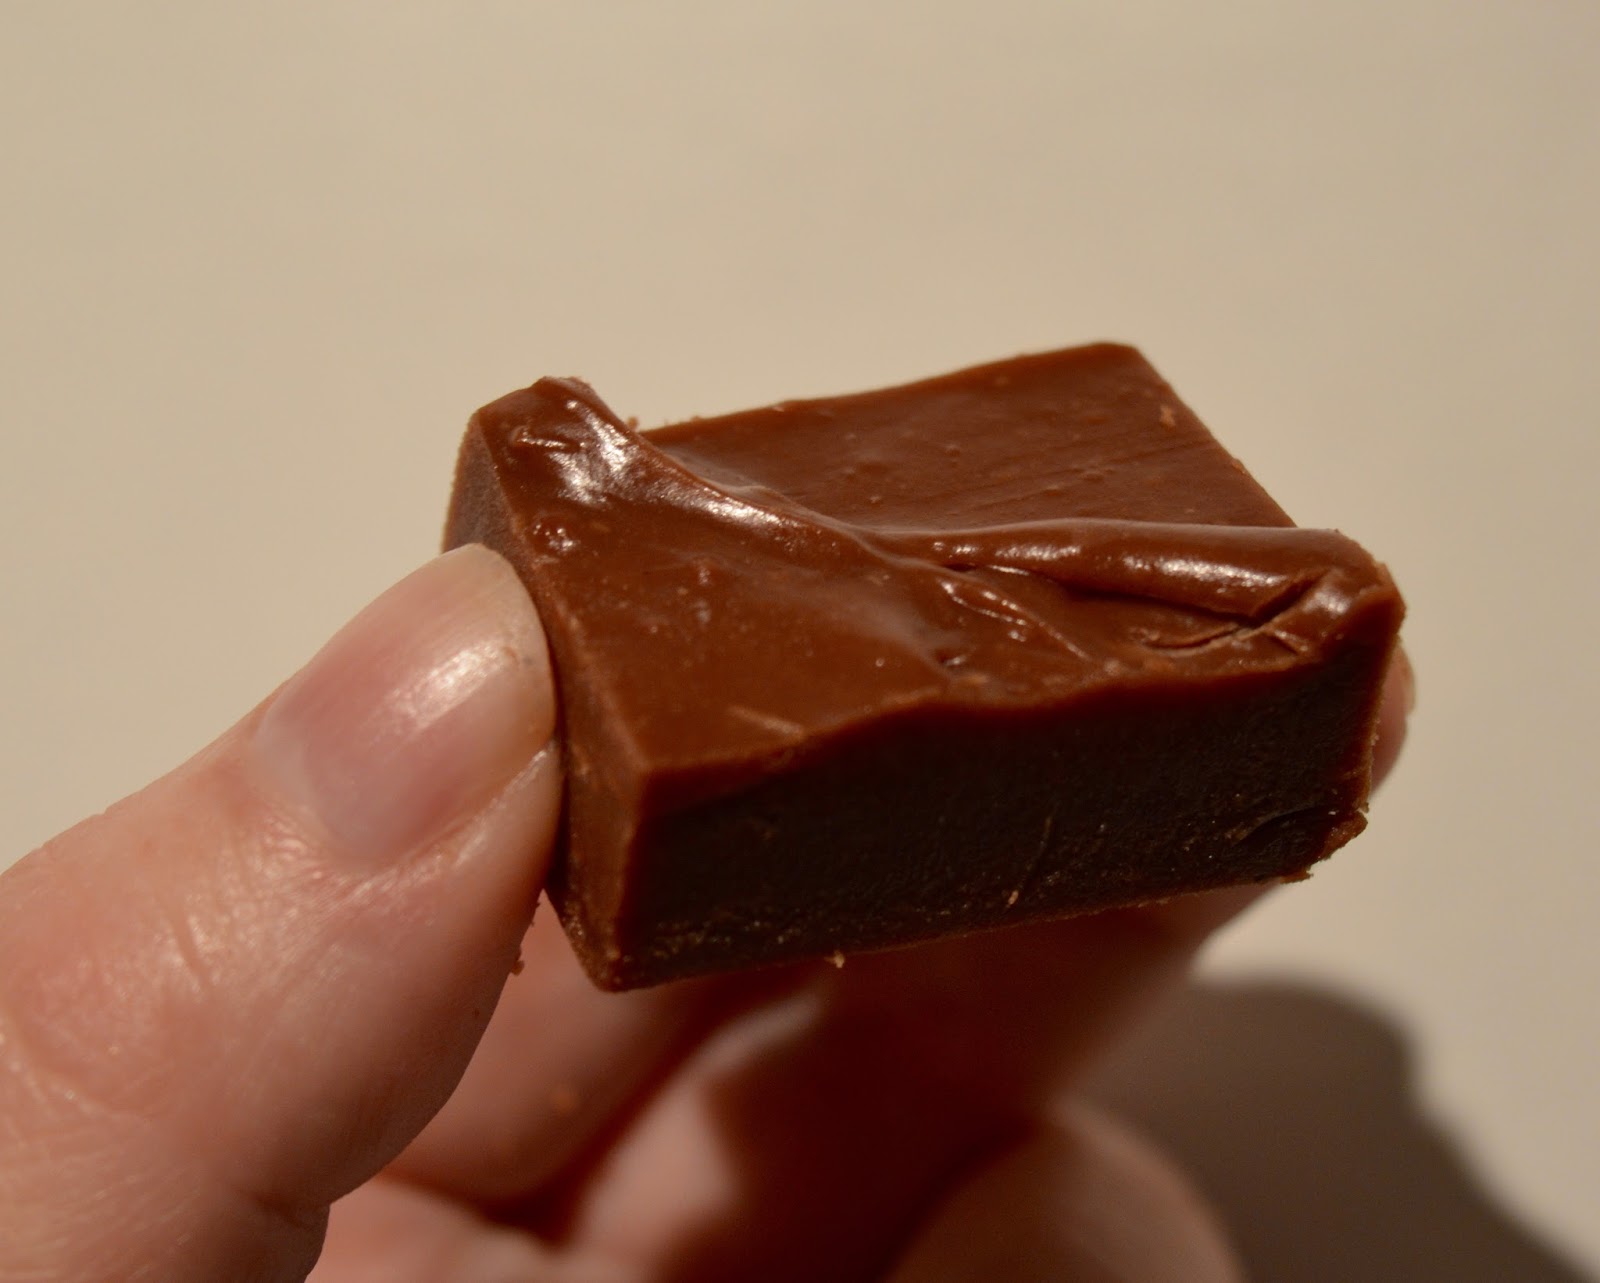 Terry's Chocolate Orange Slow Cooker Fudge Recipe - A Homemade & Edible Christmas Gift  - finished result